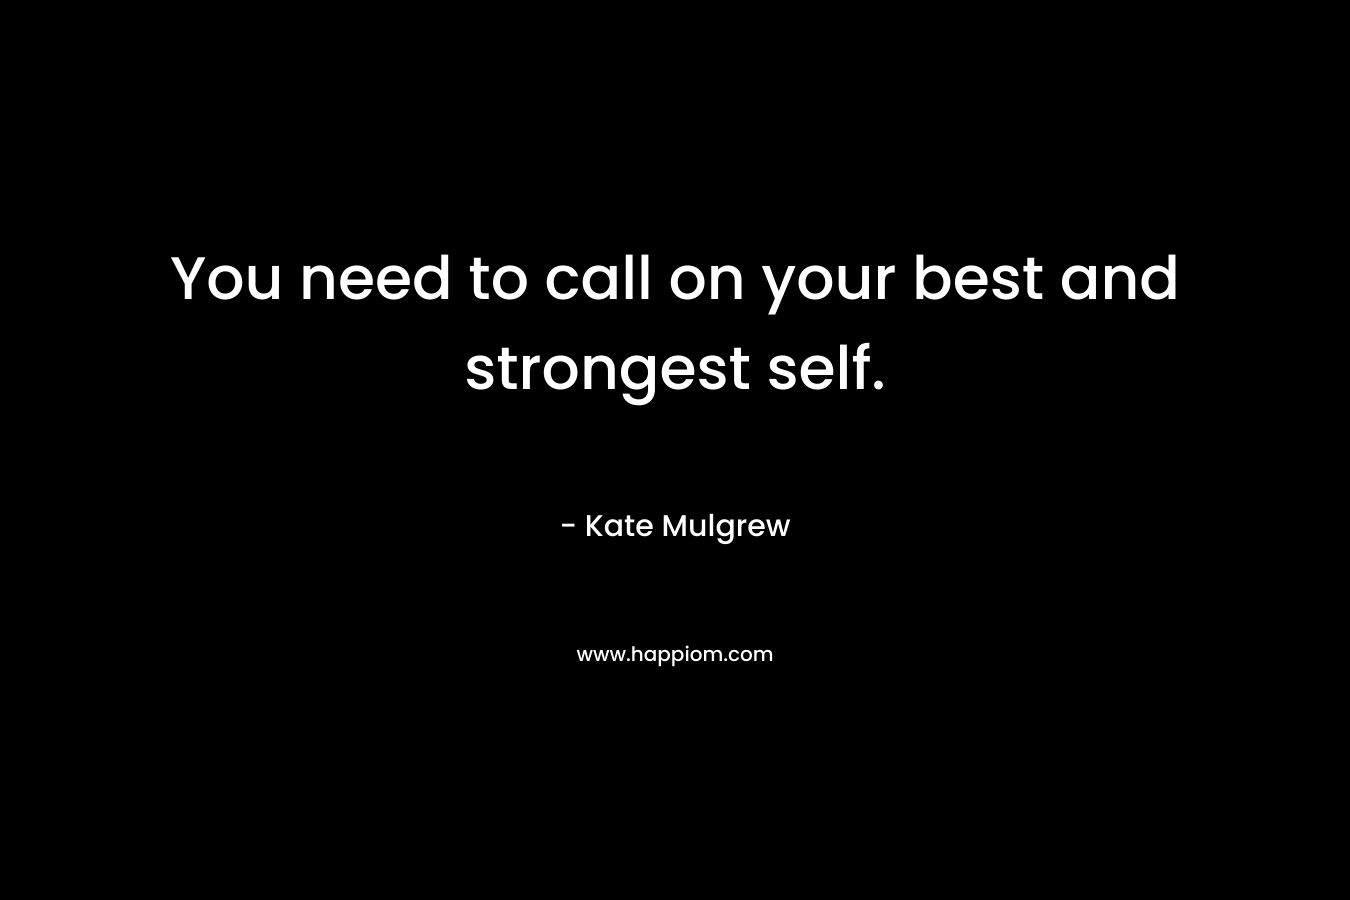 You need to call on your best and strongest self. – Kate Mulgrew